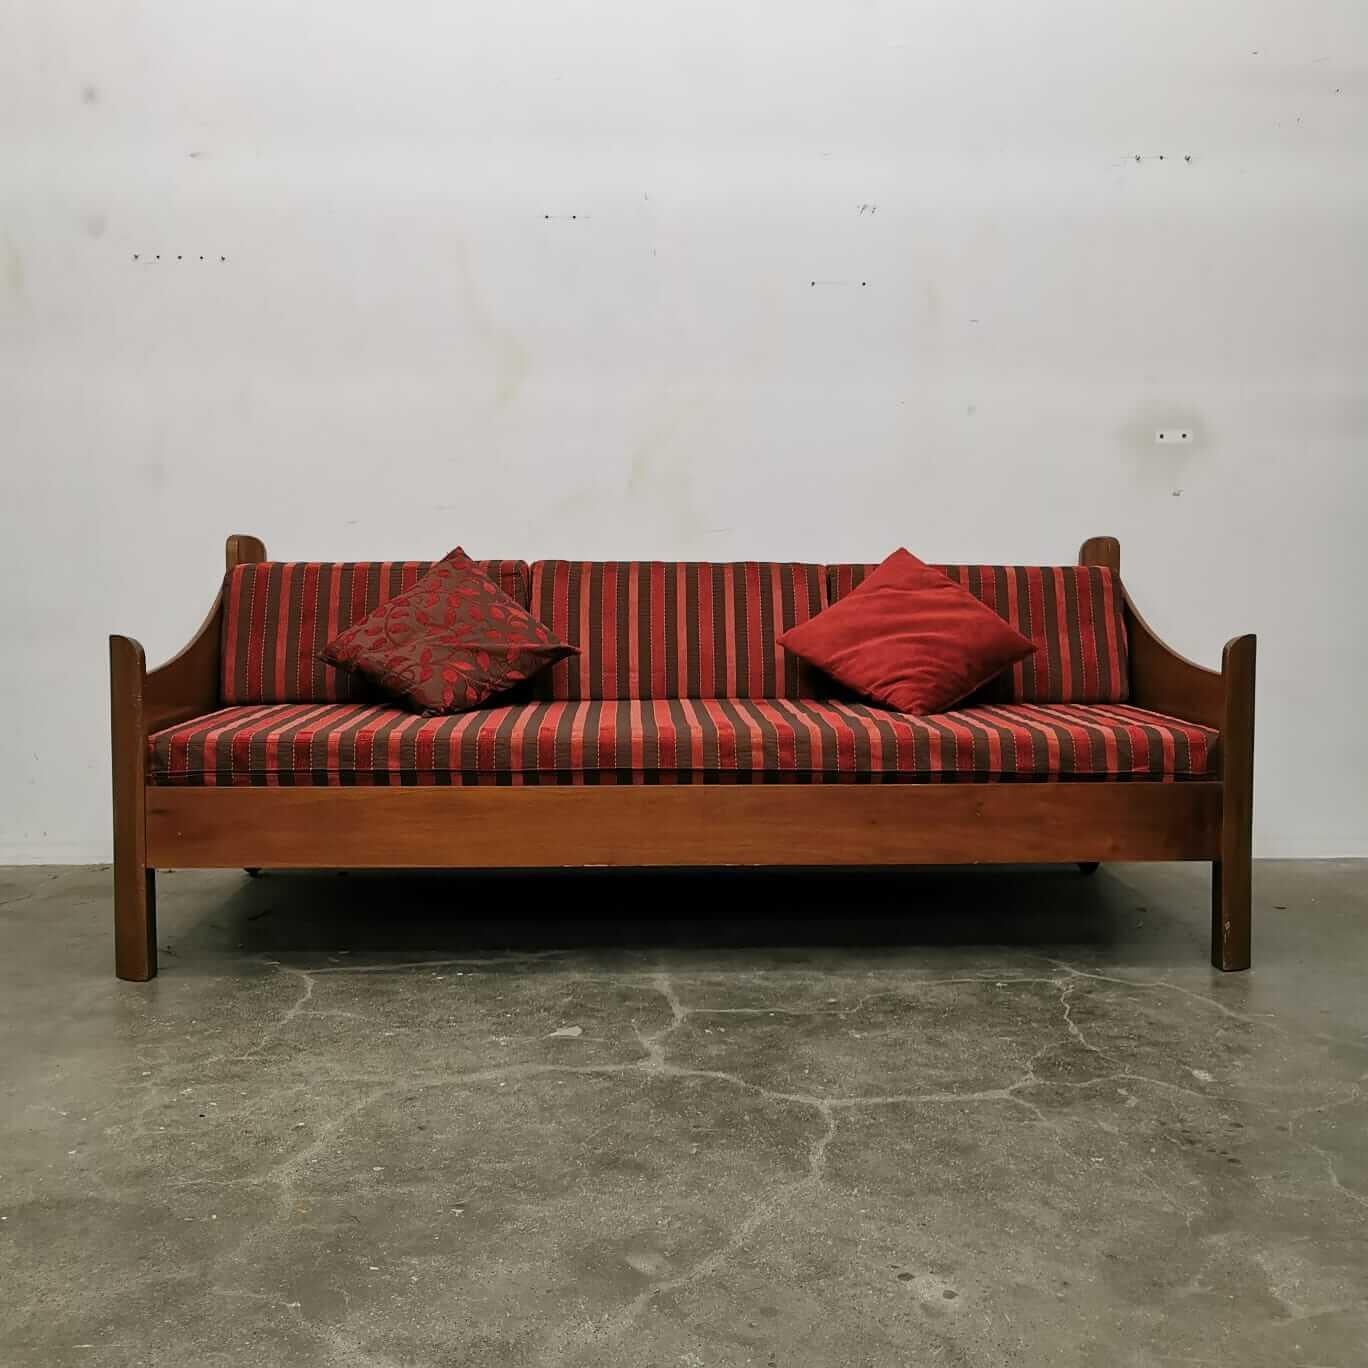 Daybed by Luigi Caccia Dominioni for Azucena. Massive walnut frame with sculptural ends designed three-dimensionally. A pleasant and little-known wooden work by the famous Italian designer.
Luigi Caccia Dominioni (Milan, December 7, 1913 - Milan,